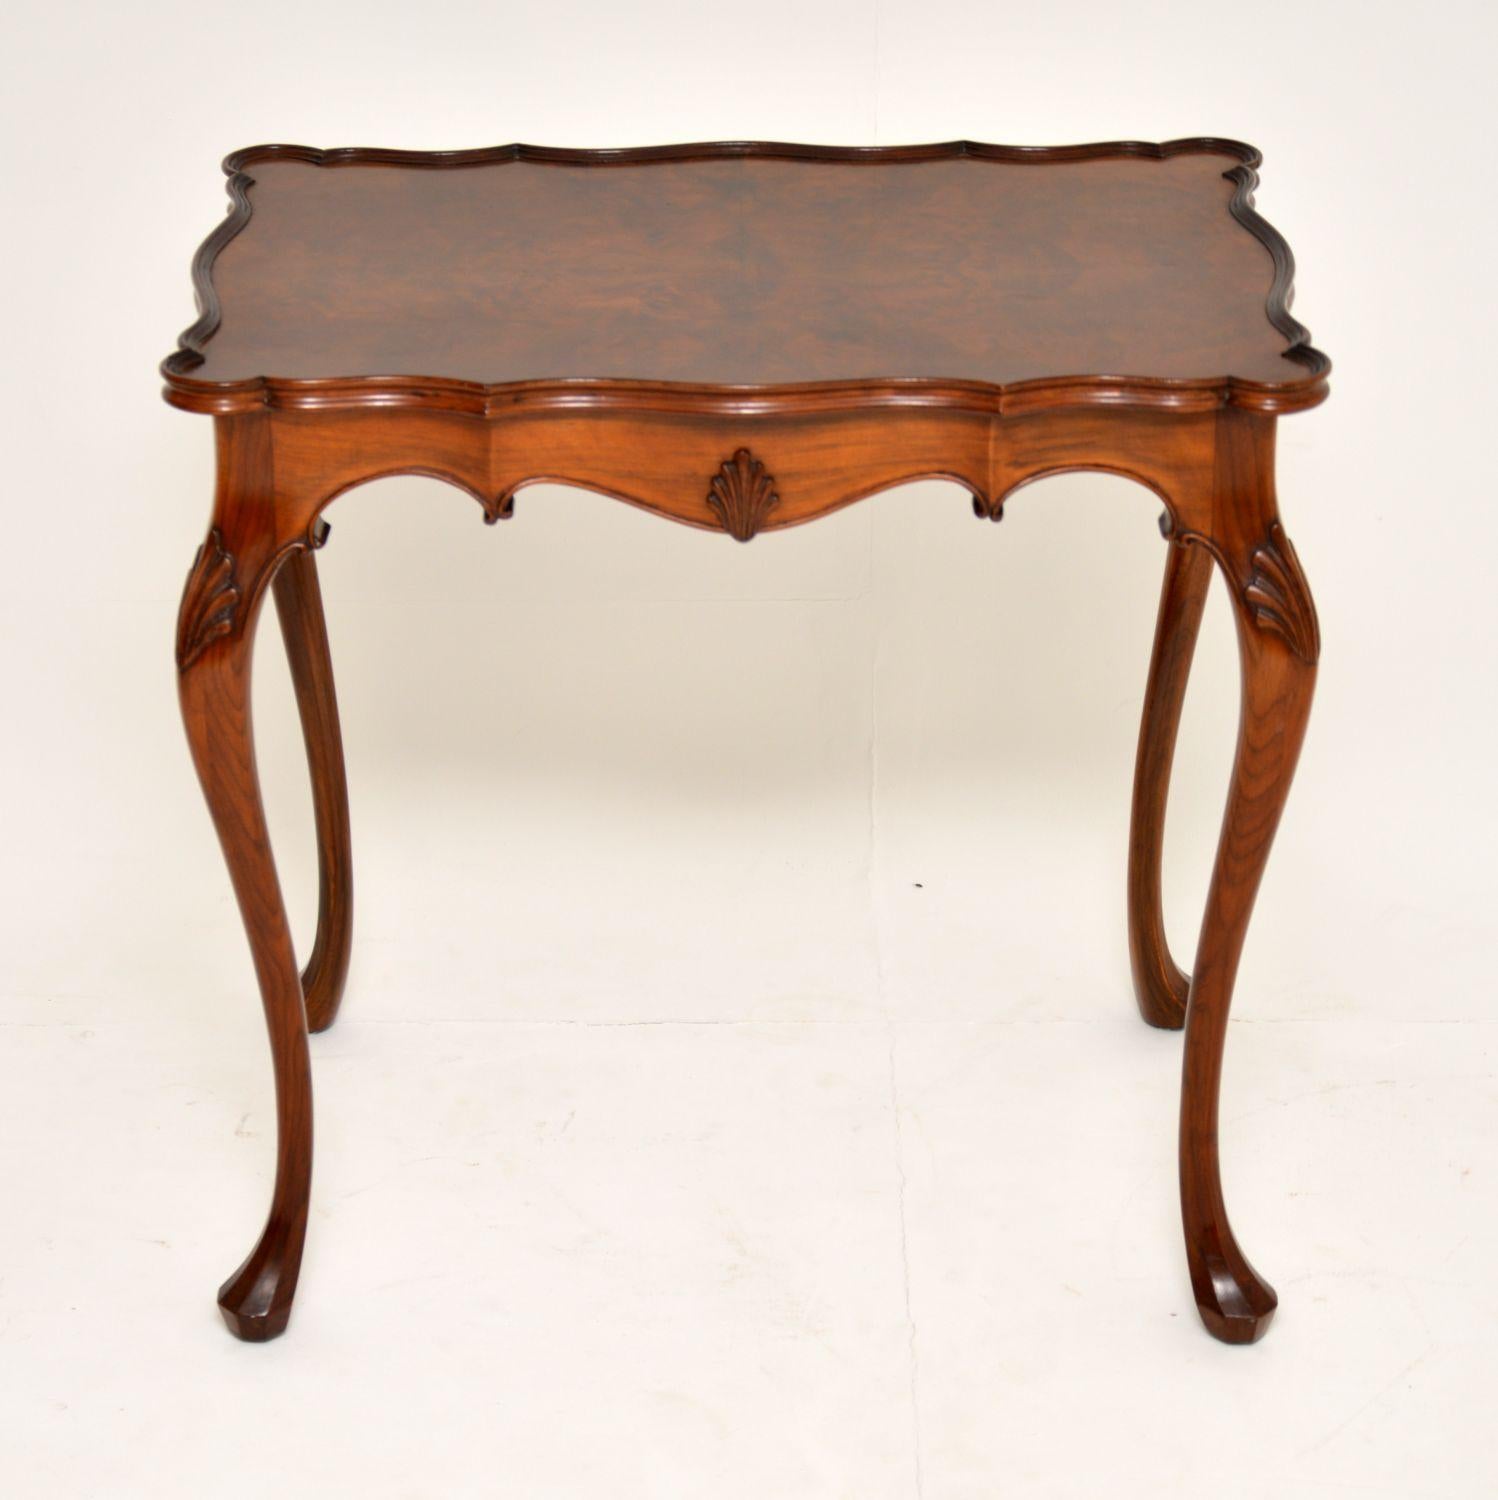 This is a superb quality walnut occasional table with a lovely shape & in excellent original condition, dating from the 1880s-1890s period. It has a burr walnut top with a pie crust edge. Below this is a solid walnut beautifully shaped border edge,